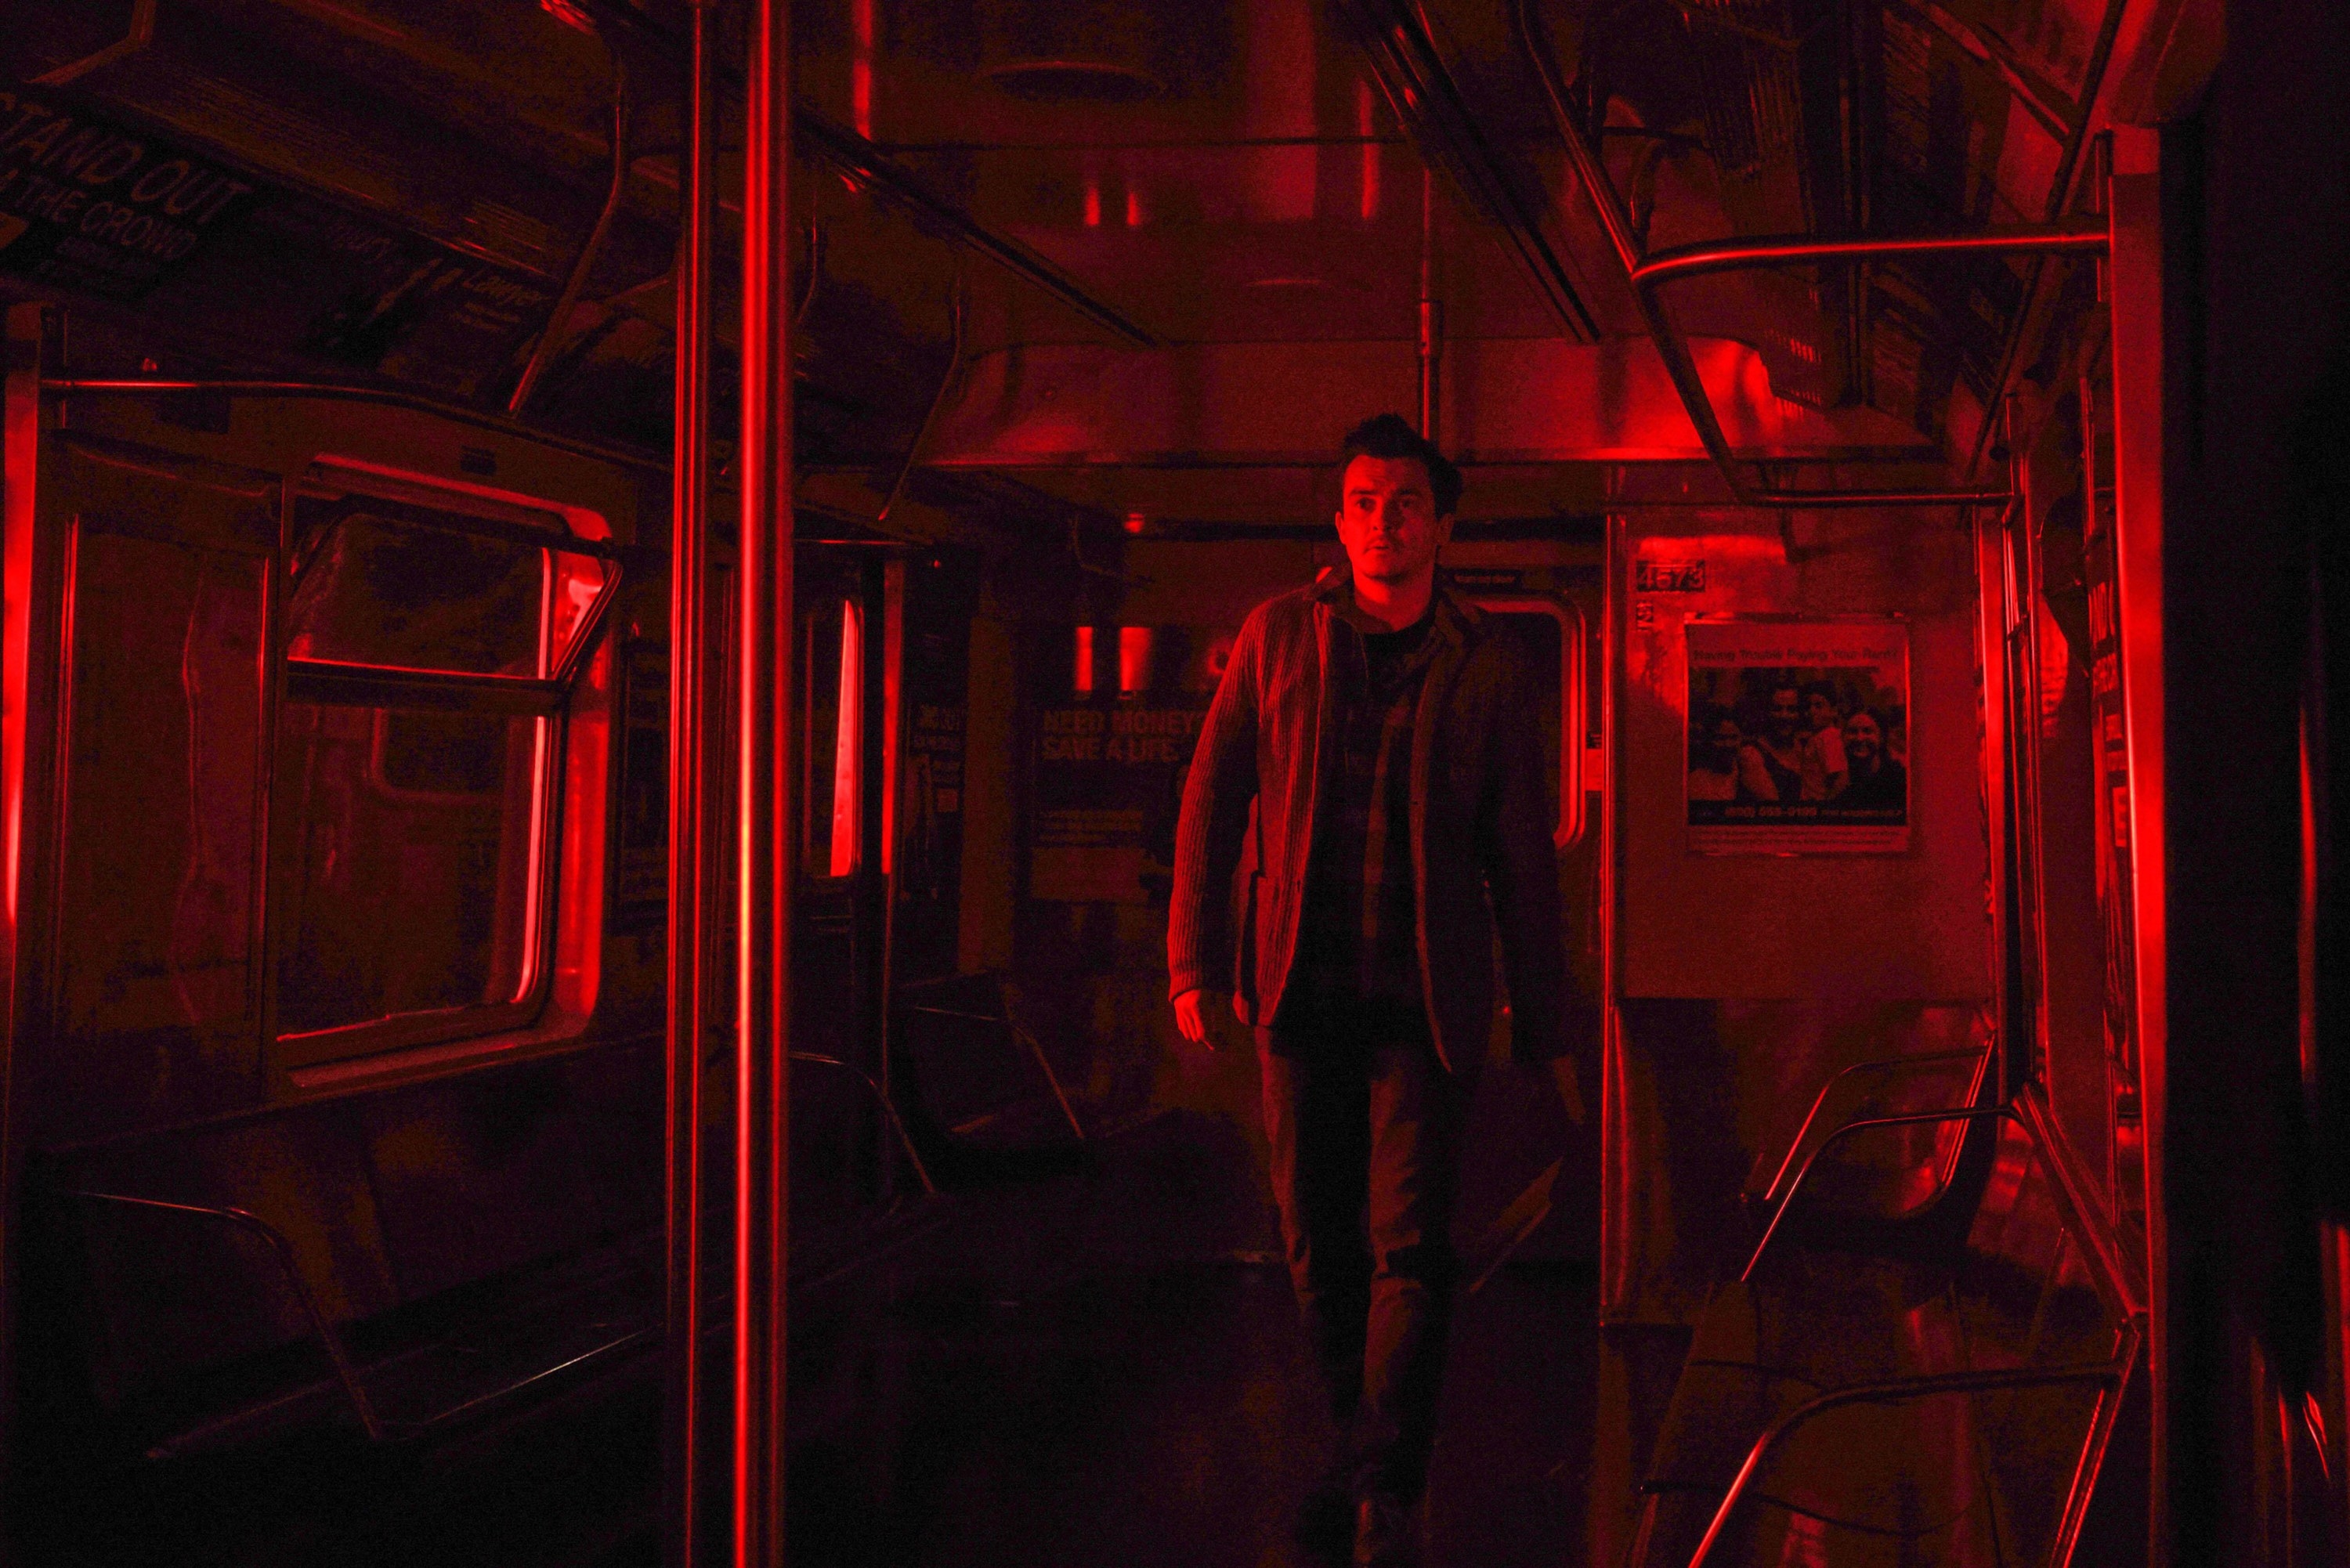 Rupert Friend experiences a red-soaked nightmare aboard a subway car in &quot;Separation&quot;